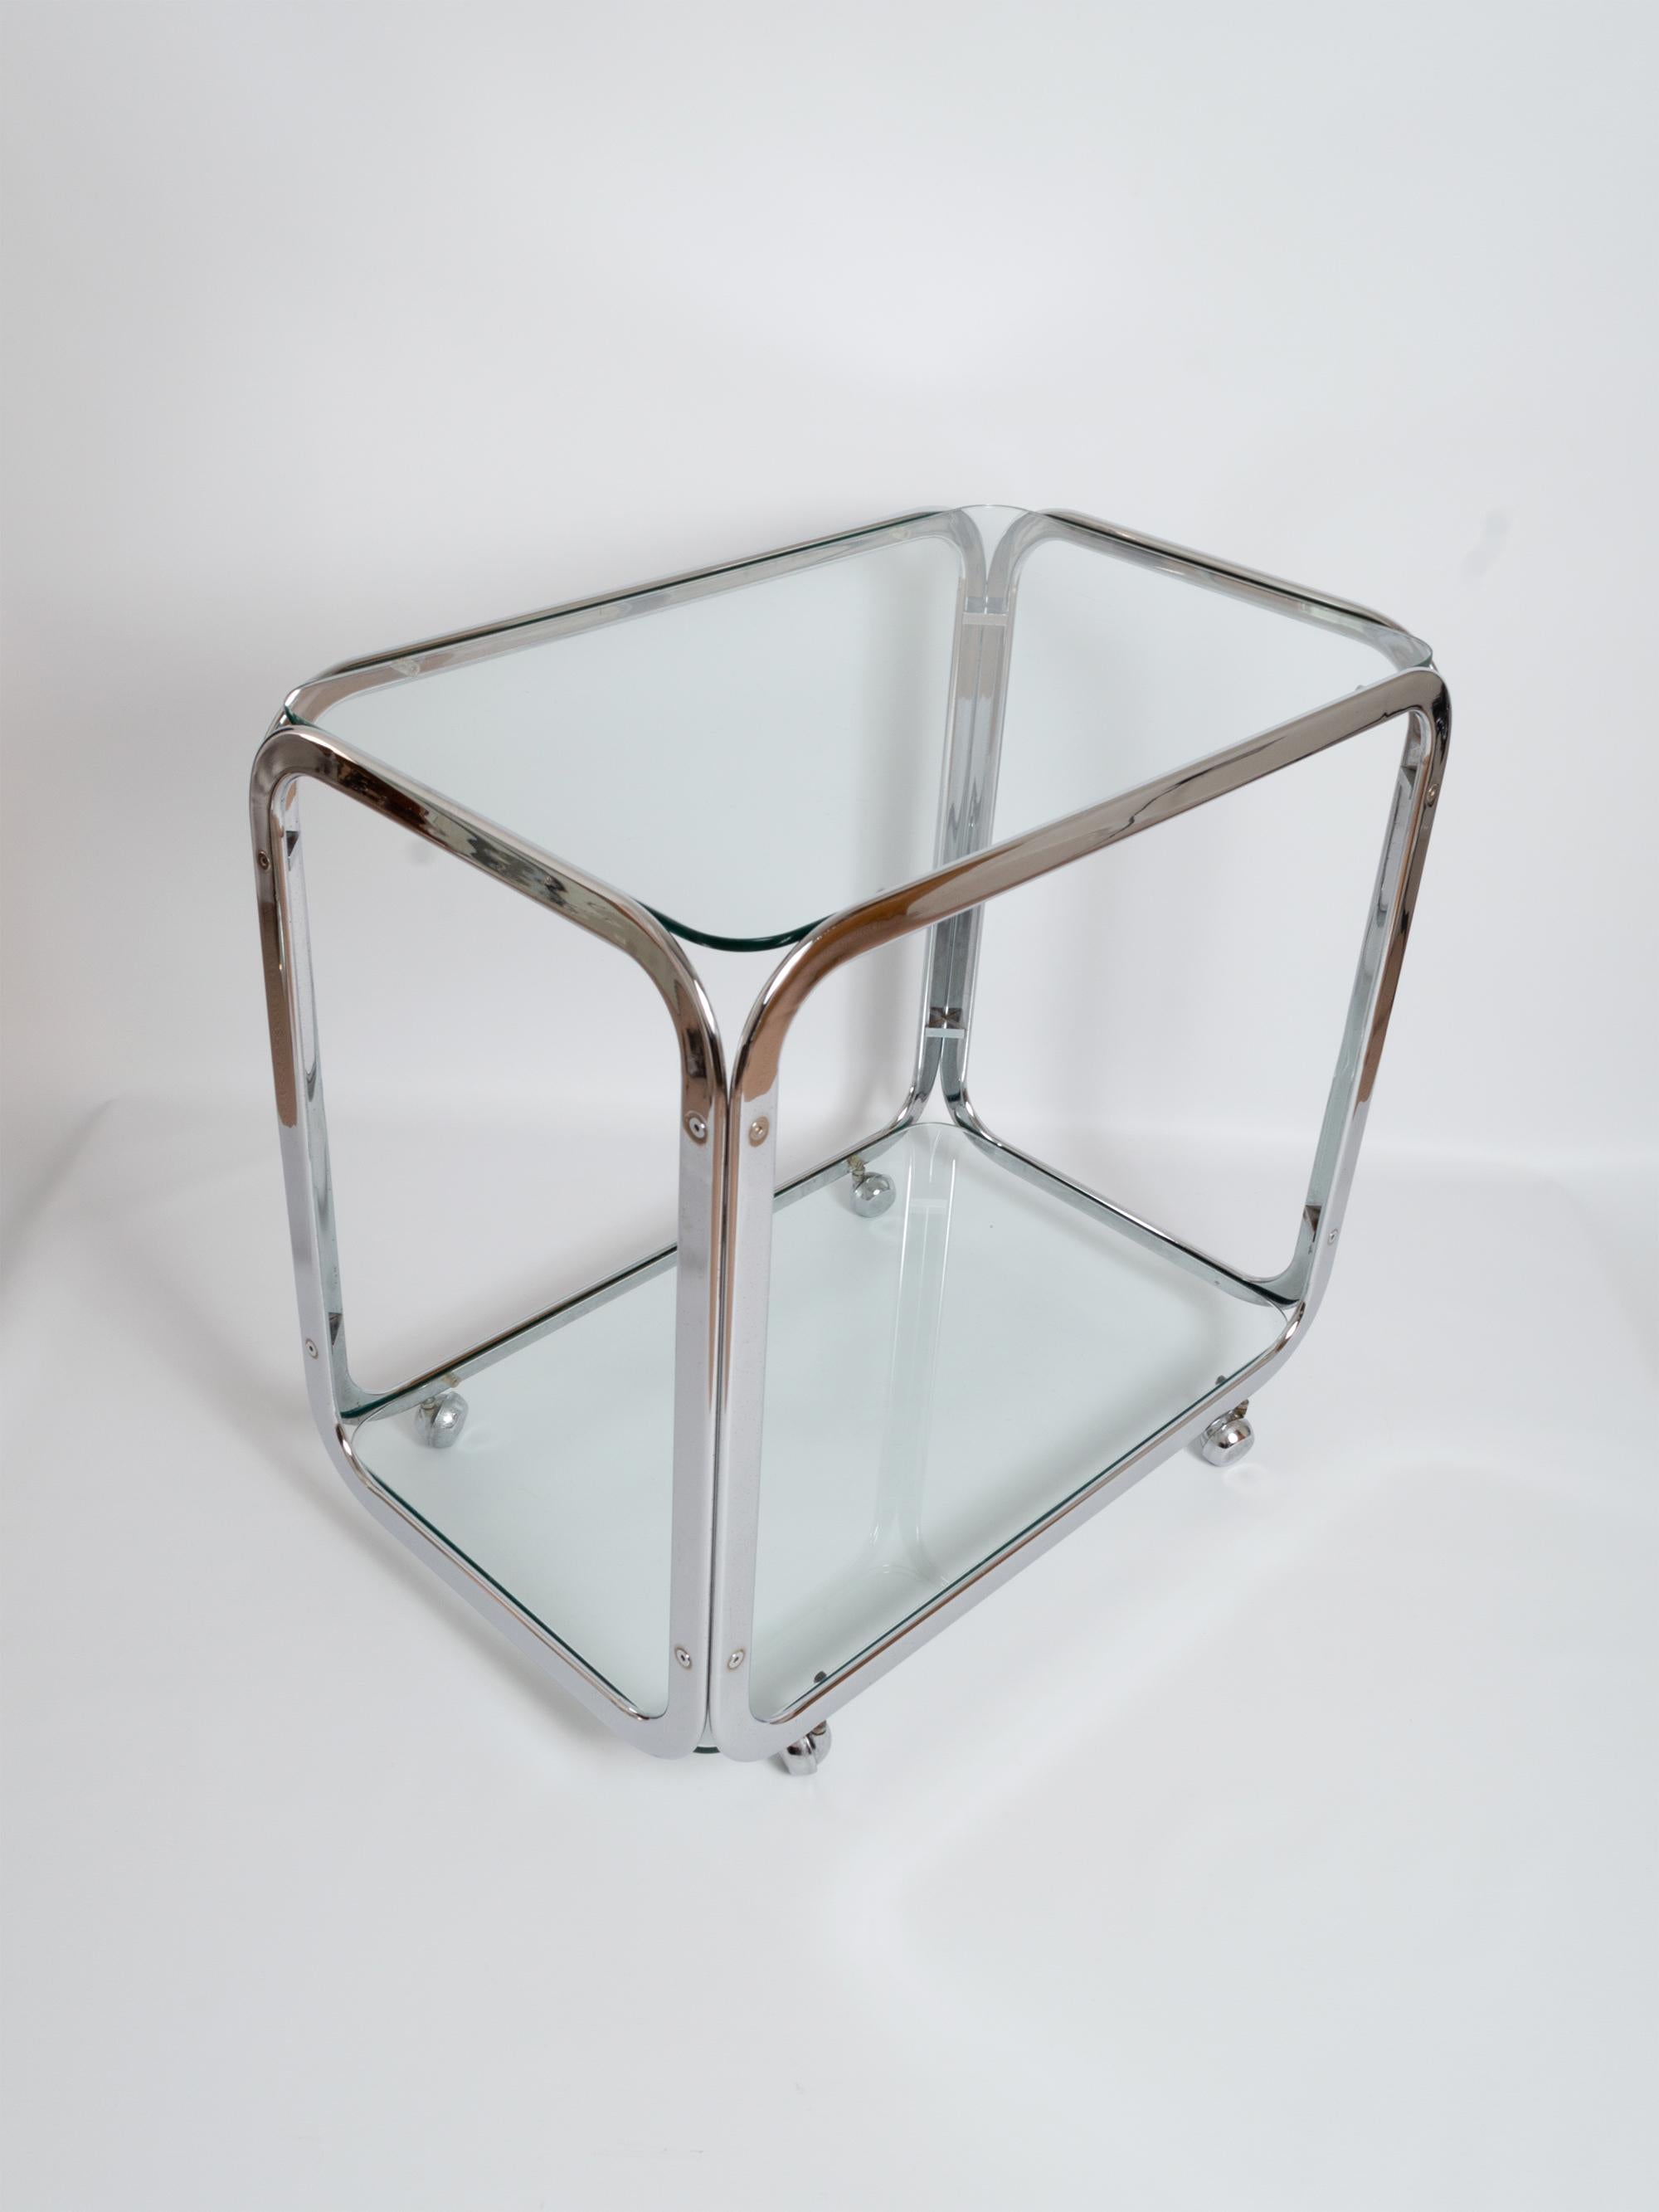 Midcentury chrome-plated bar cart drinks trolley, Italy, circa 1970. In the manner of Milo Baughman.
In very good vintage condition showing minor signs of wear commensurate of age.